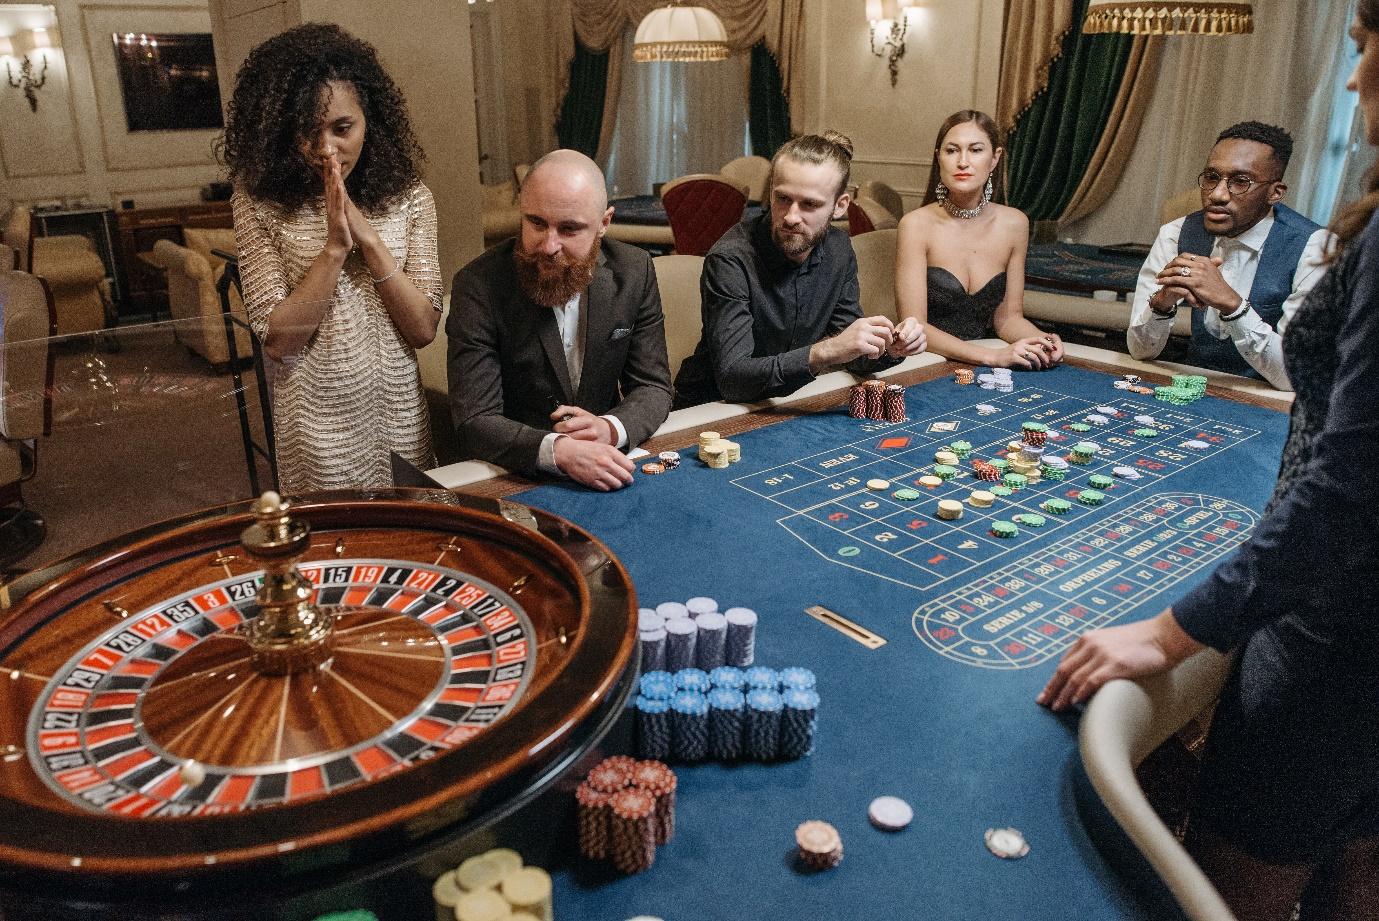 A group of people at a roulette table

Description automatically generated